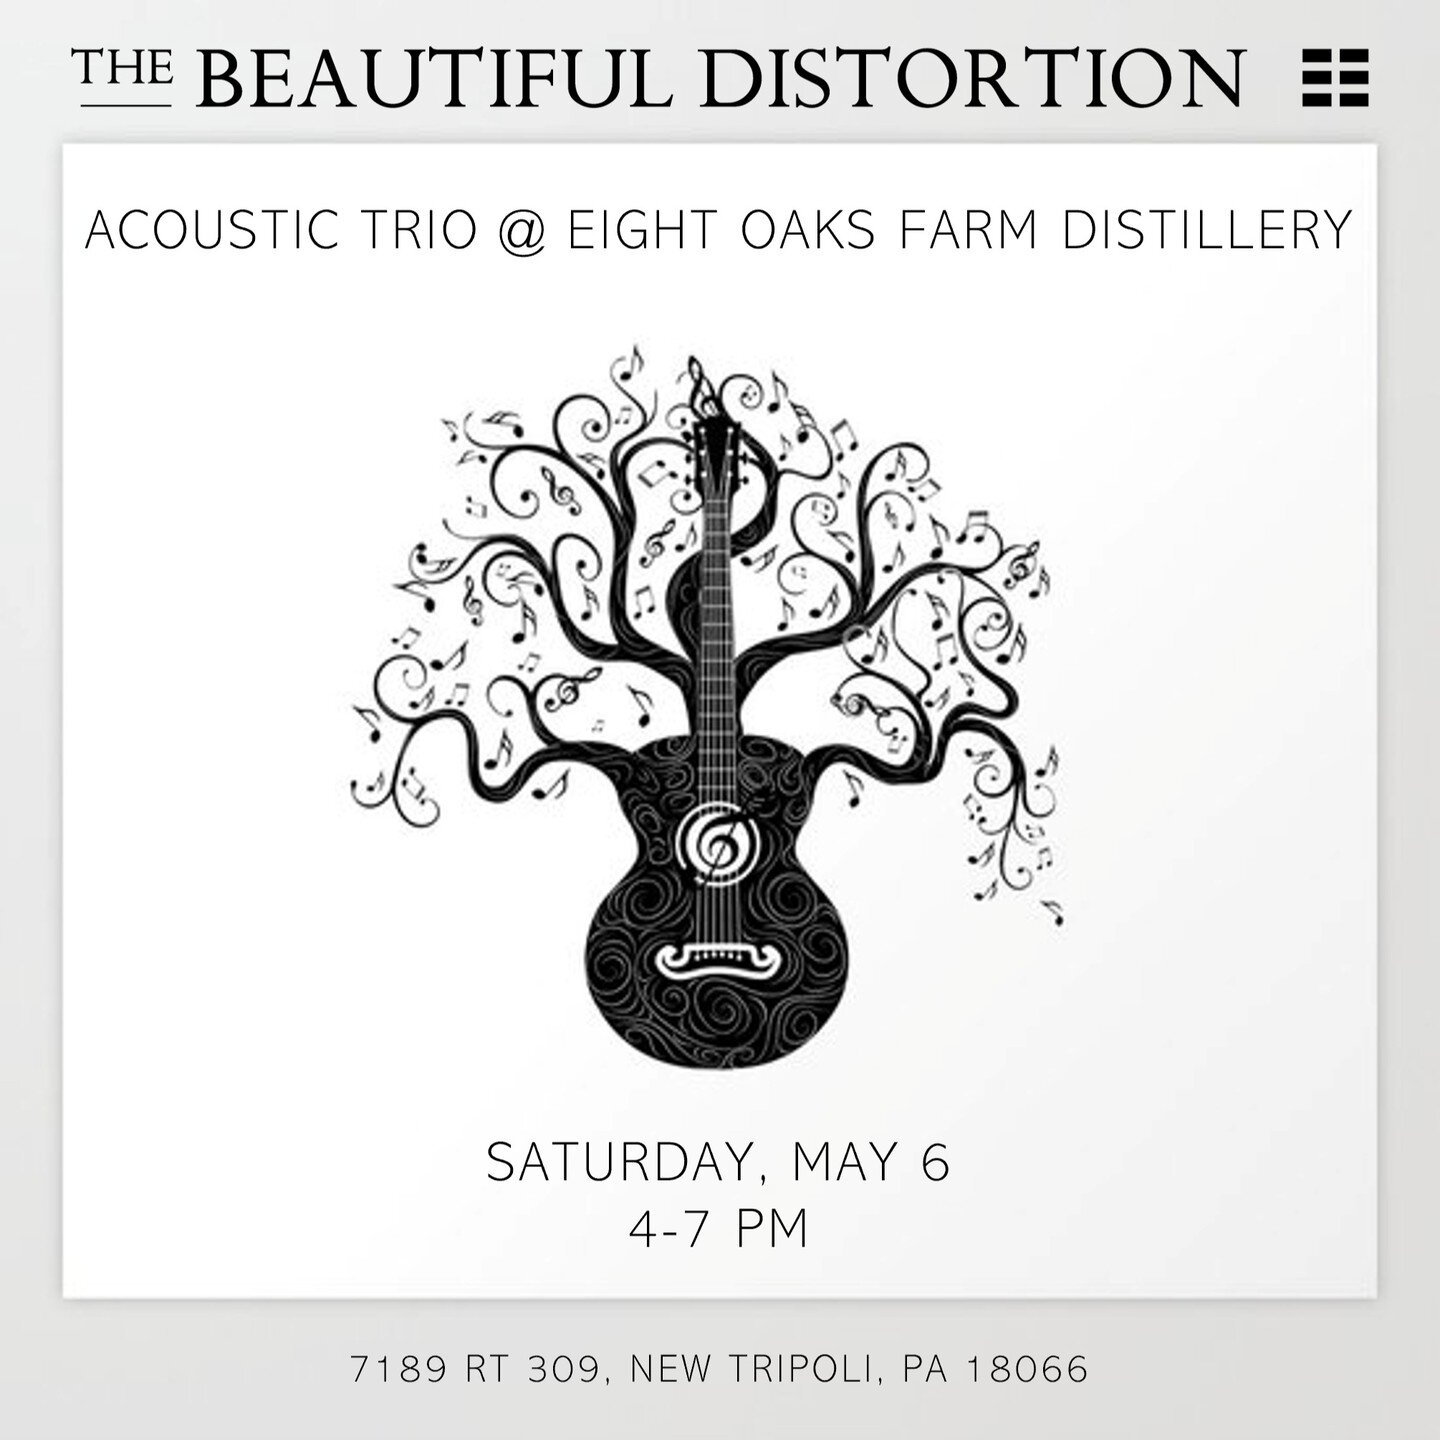 Karen/Amy/Dave acoustic @ @eightoaksdistillery this Saturday, May 6 from 4-7 PM! Harmonies as delicious as the food and drinks! It's going to be a beautiful day... come hang!

Artwork credit: AnnArtshock